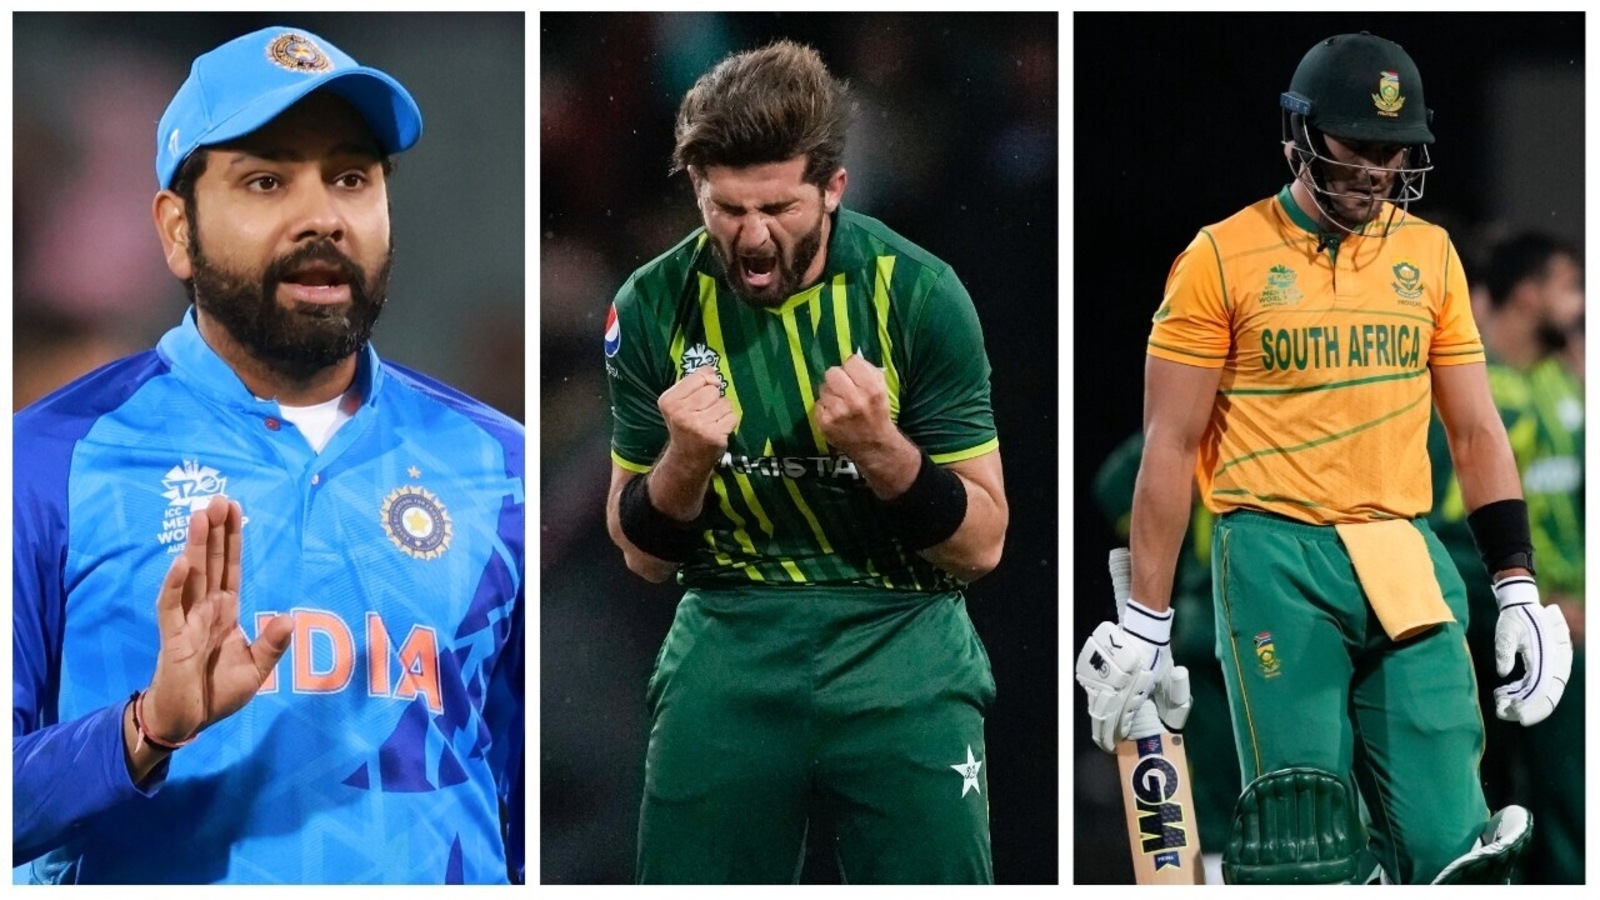 t20-world-cup-points-table-can-pakistan-challenge-india-south-africa-for-place-in-semi-finals-after-win-over-proteas